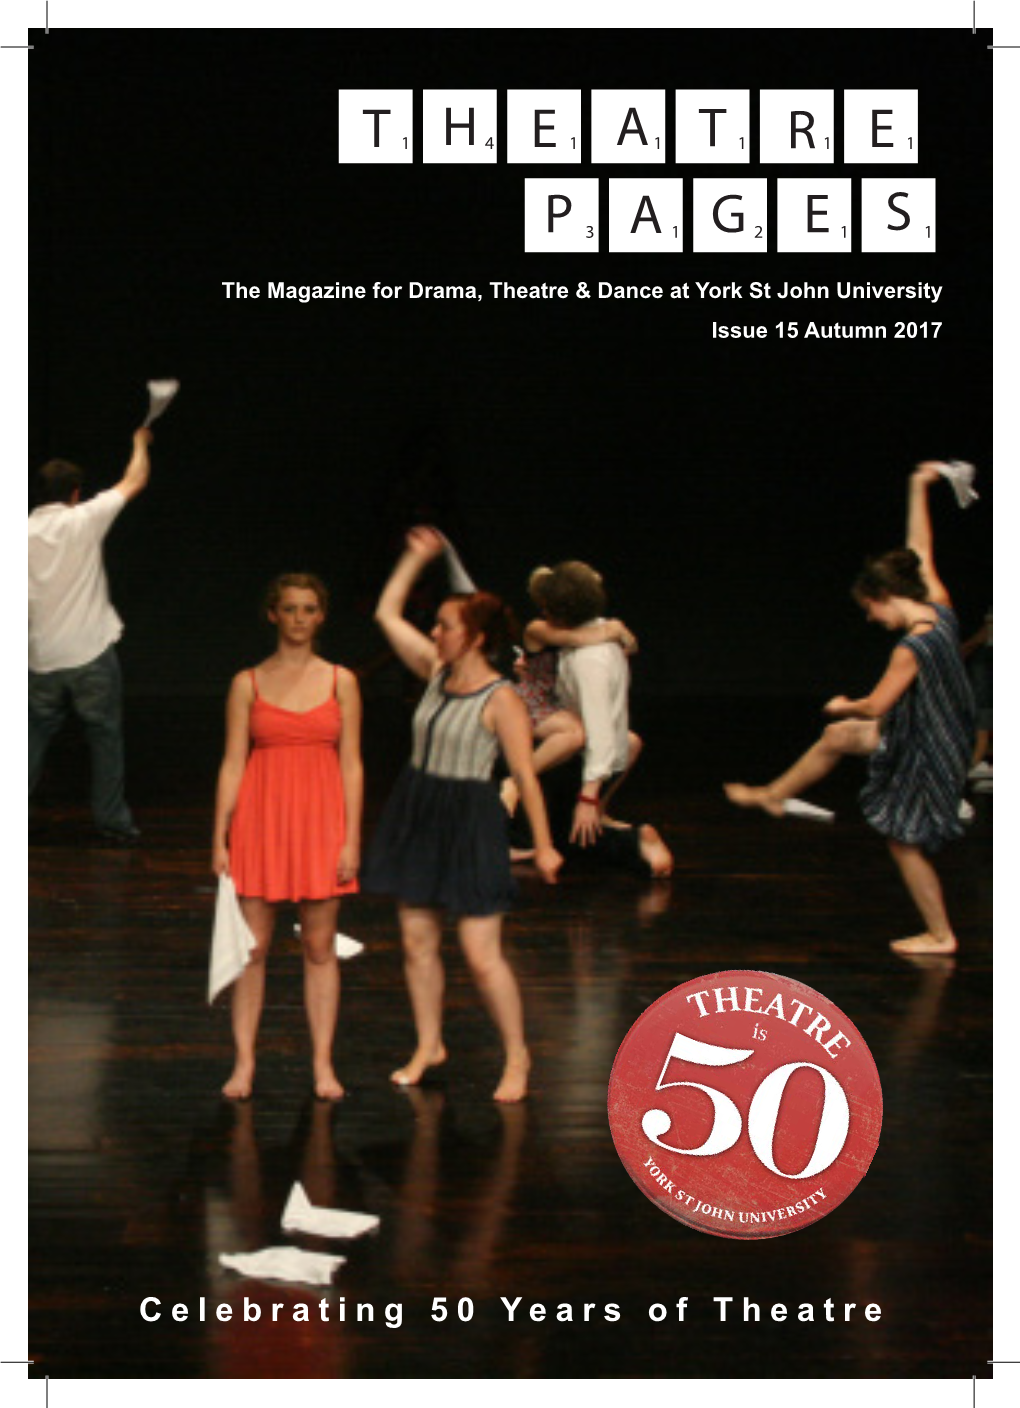 Theatre Pages Issue No 15 • Autumn 2017 Special Issue Marking 50 Years of Theatre at York St John University